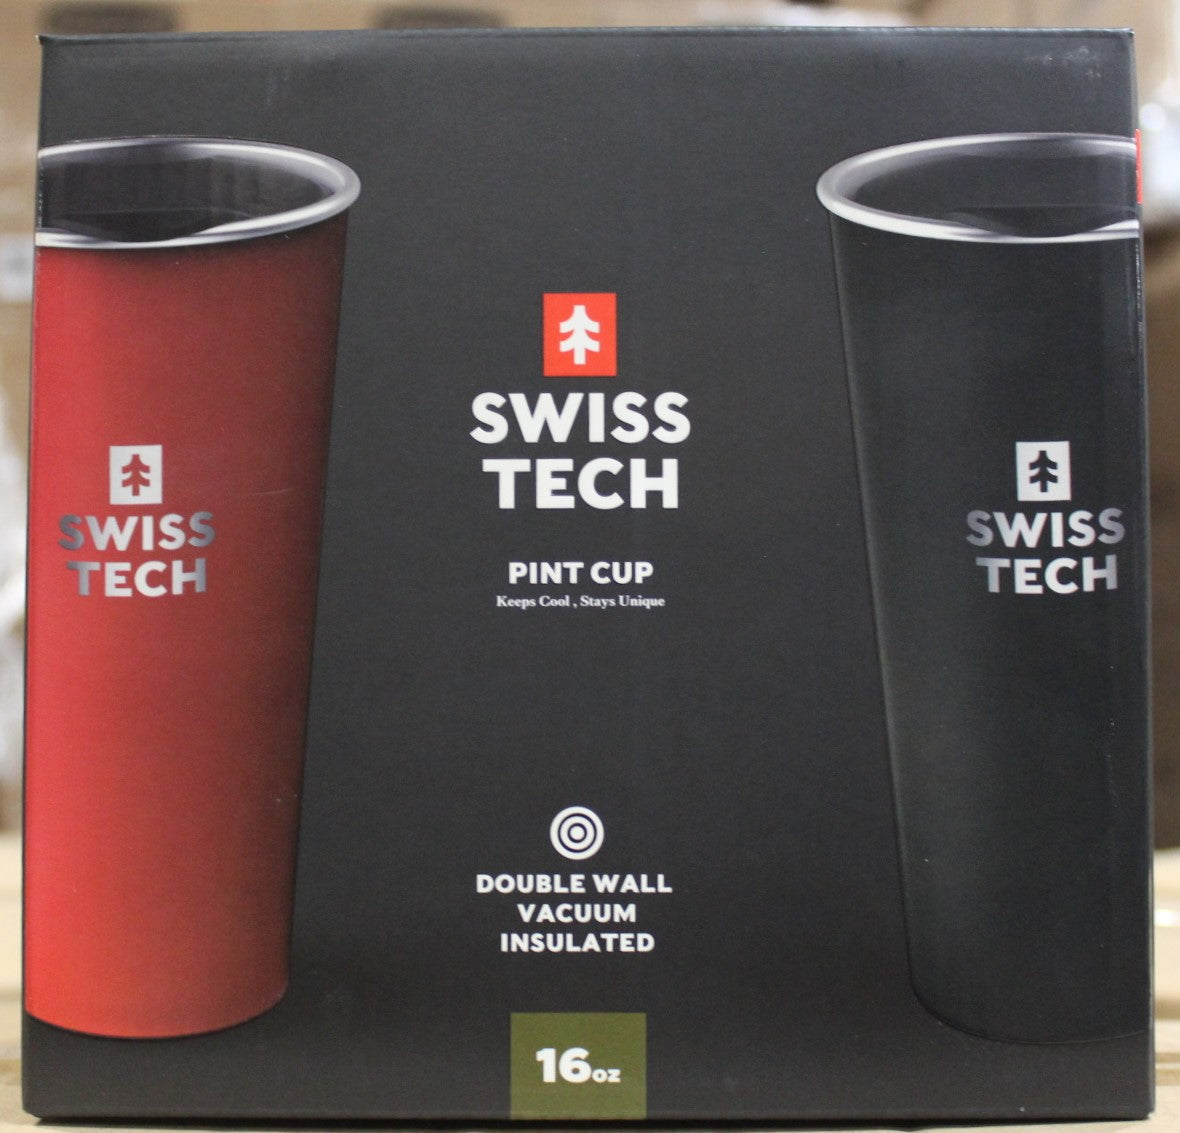 Swiss+Tech 16oz Stainless Steel Cups with lids, 2 Pack Double Wall Pint Cups, Insulated Tumbler with Lid, Unbreakable Durable Cups, Color Options:  Red & Black, Turquoise & Black, and Red & White